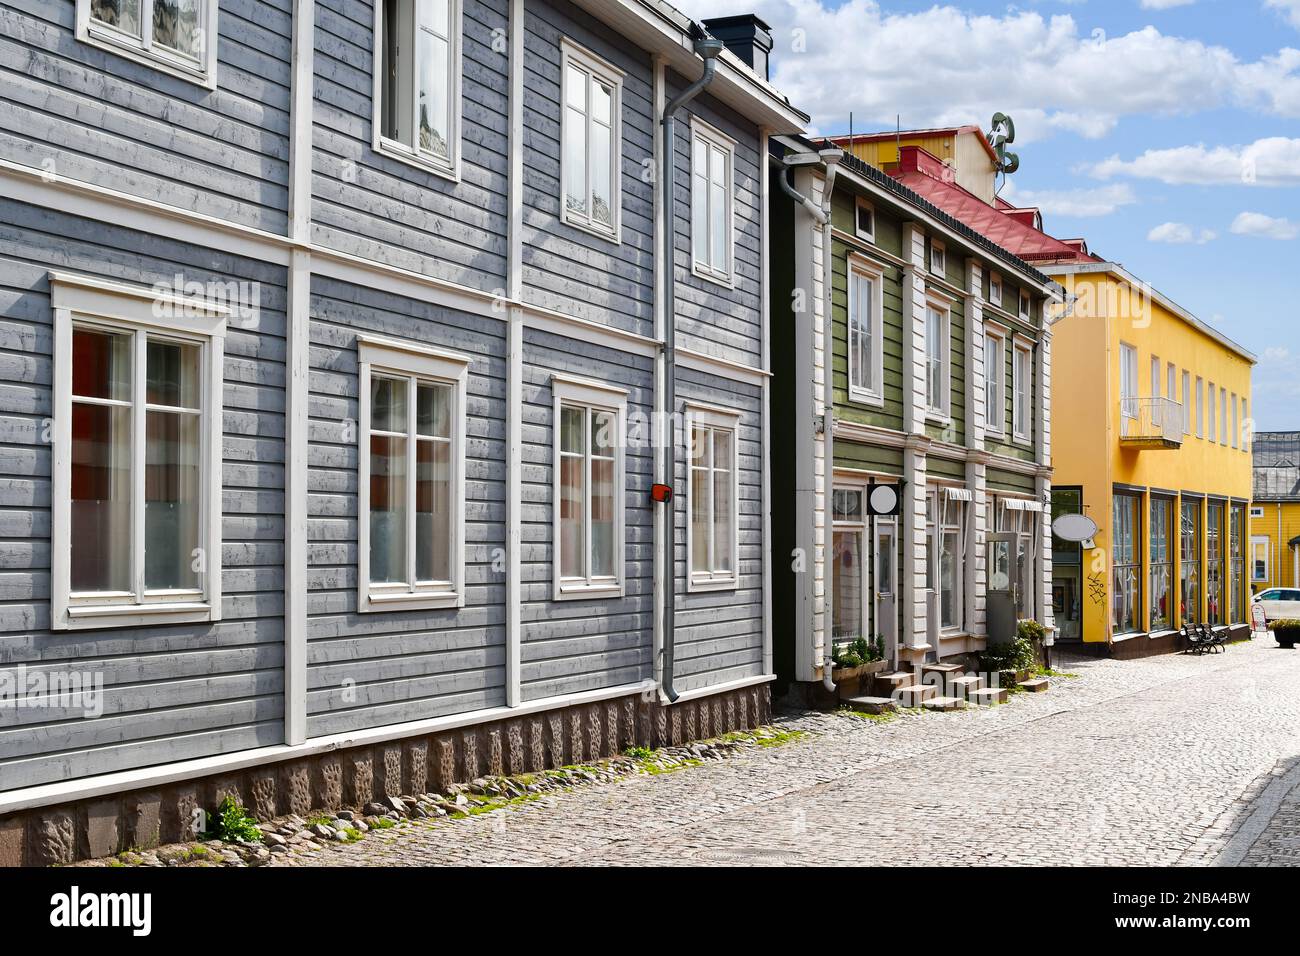 Colorful and picturesque shops and wooden buildings line the main cobblestone road through the medieval Old Town of Porvoo, Finland Stock Photo